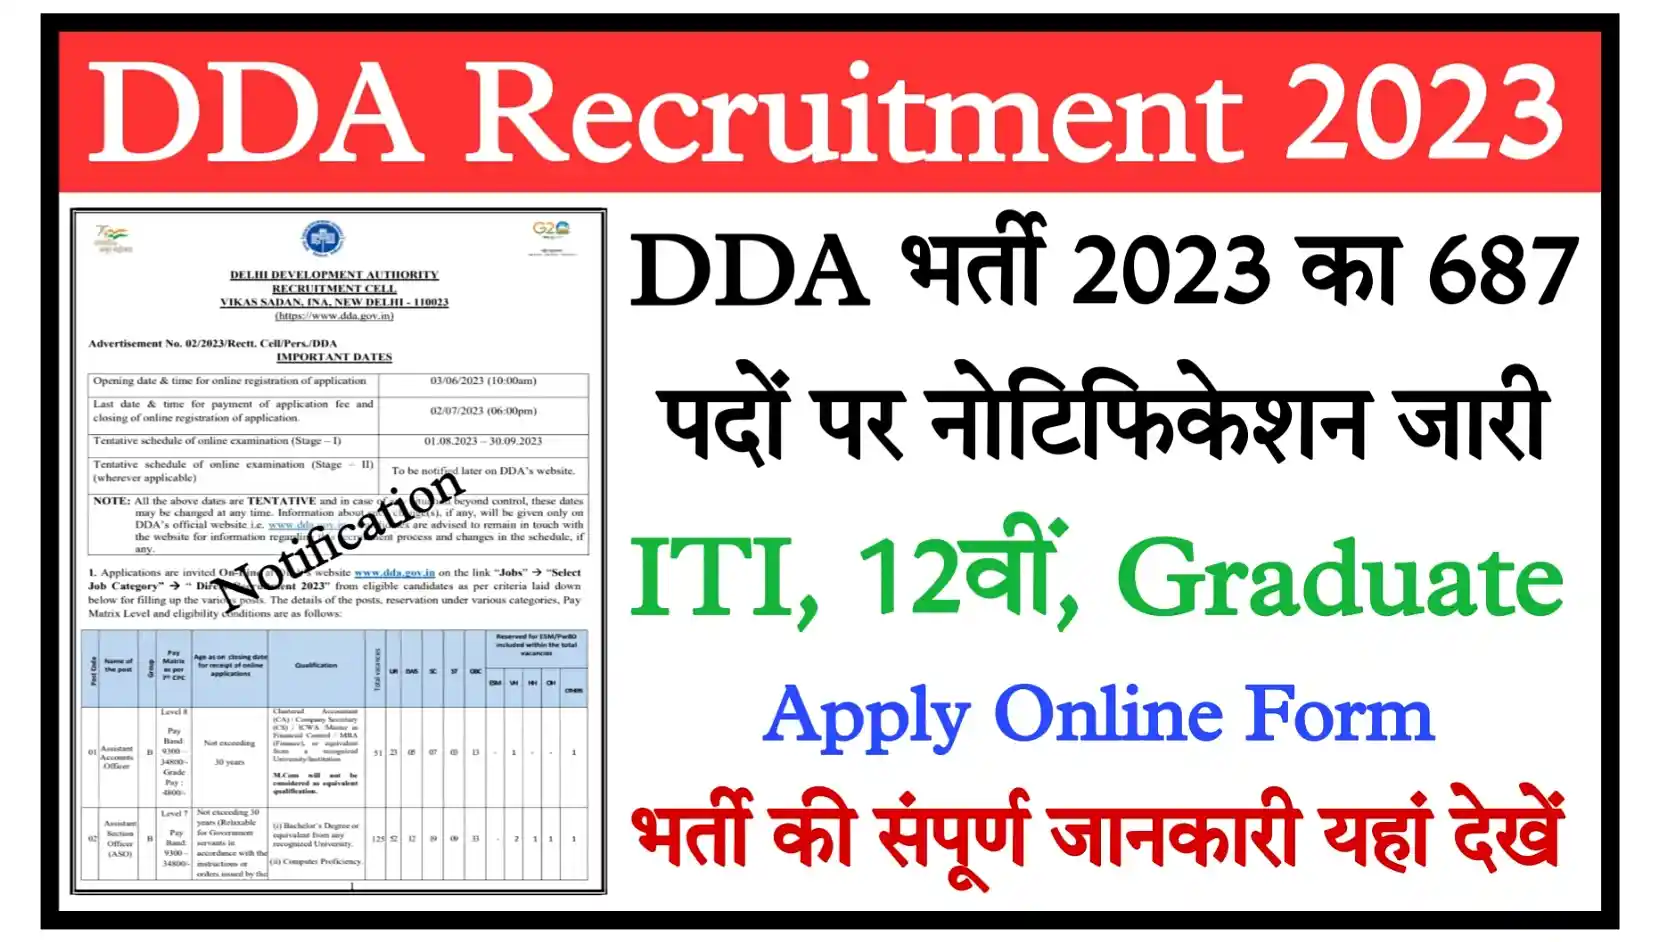 DDA Recruitment 2023 Notification, Apply Online For 687 Posts, Check All Details